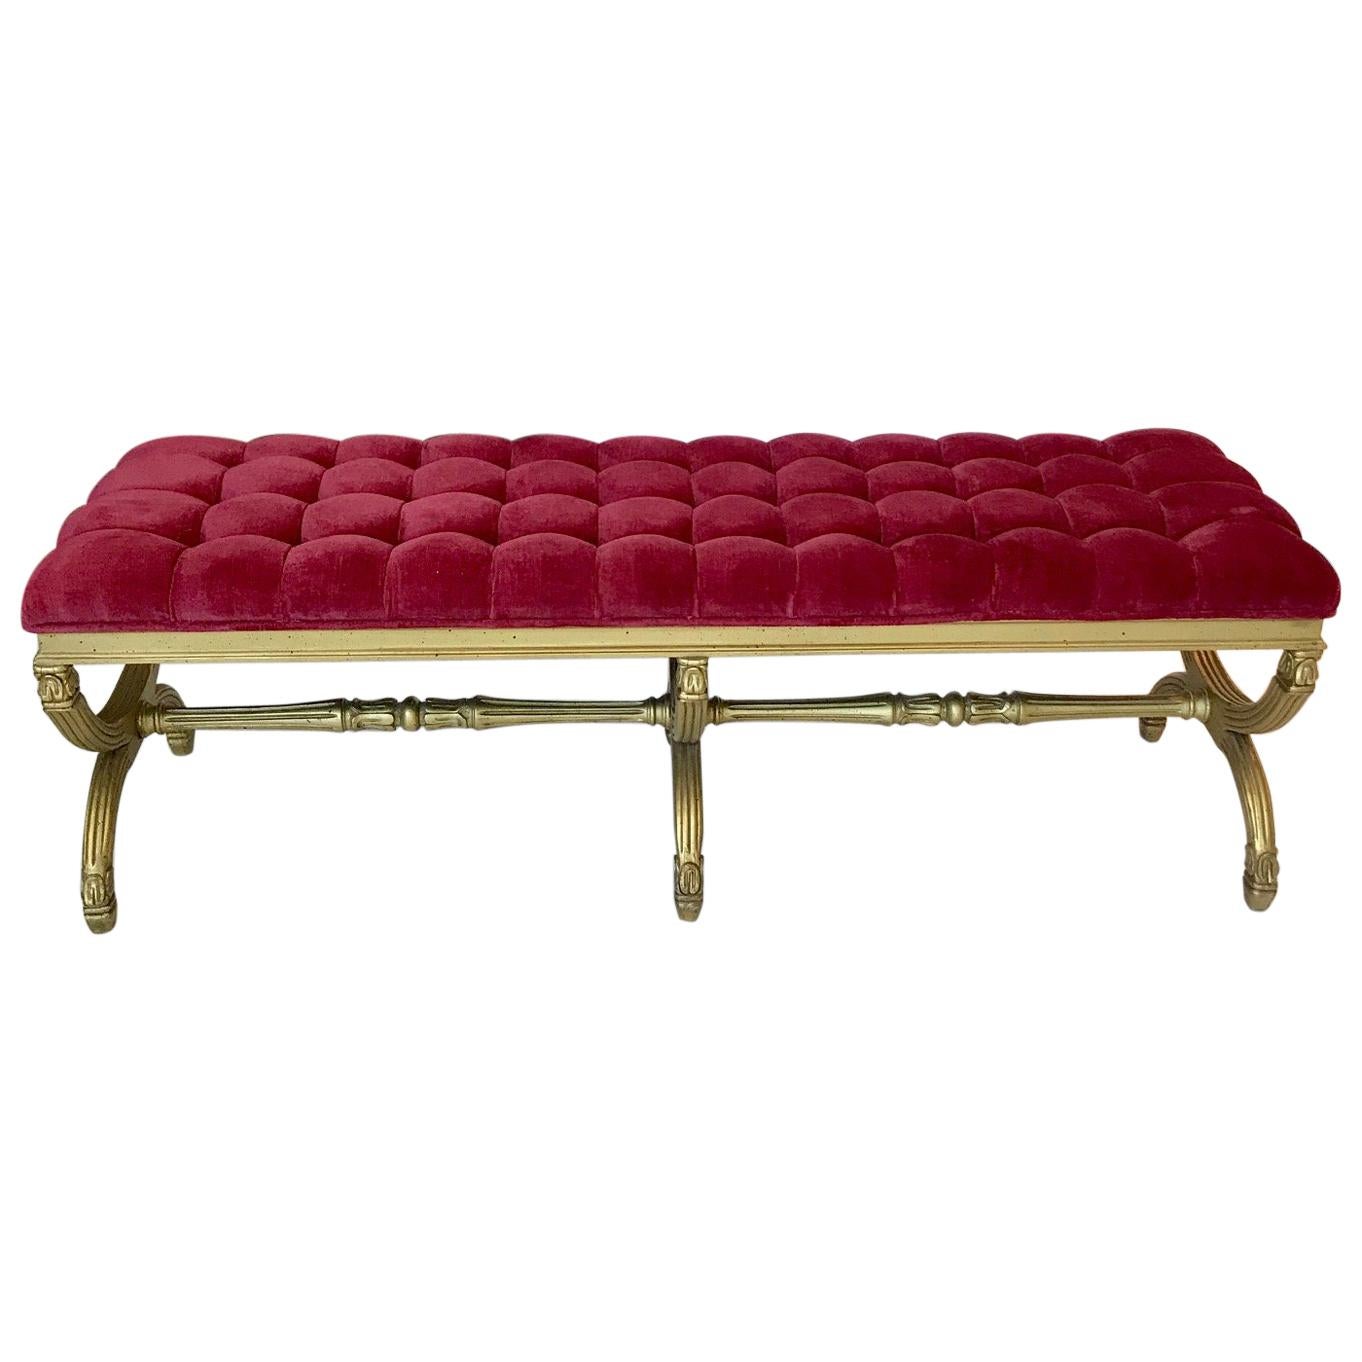 Louis XVI Style Gilded Bench with Tufted Seat Design, Italy